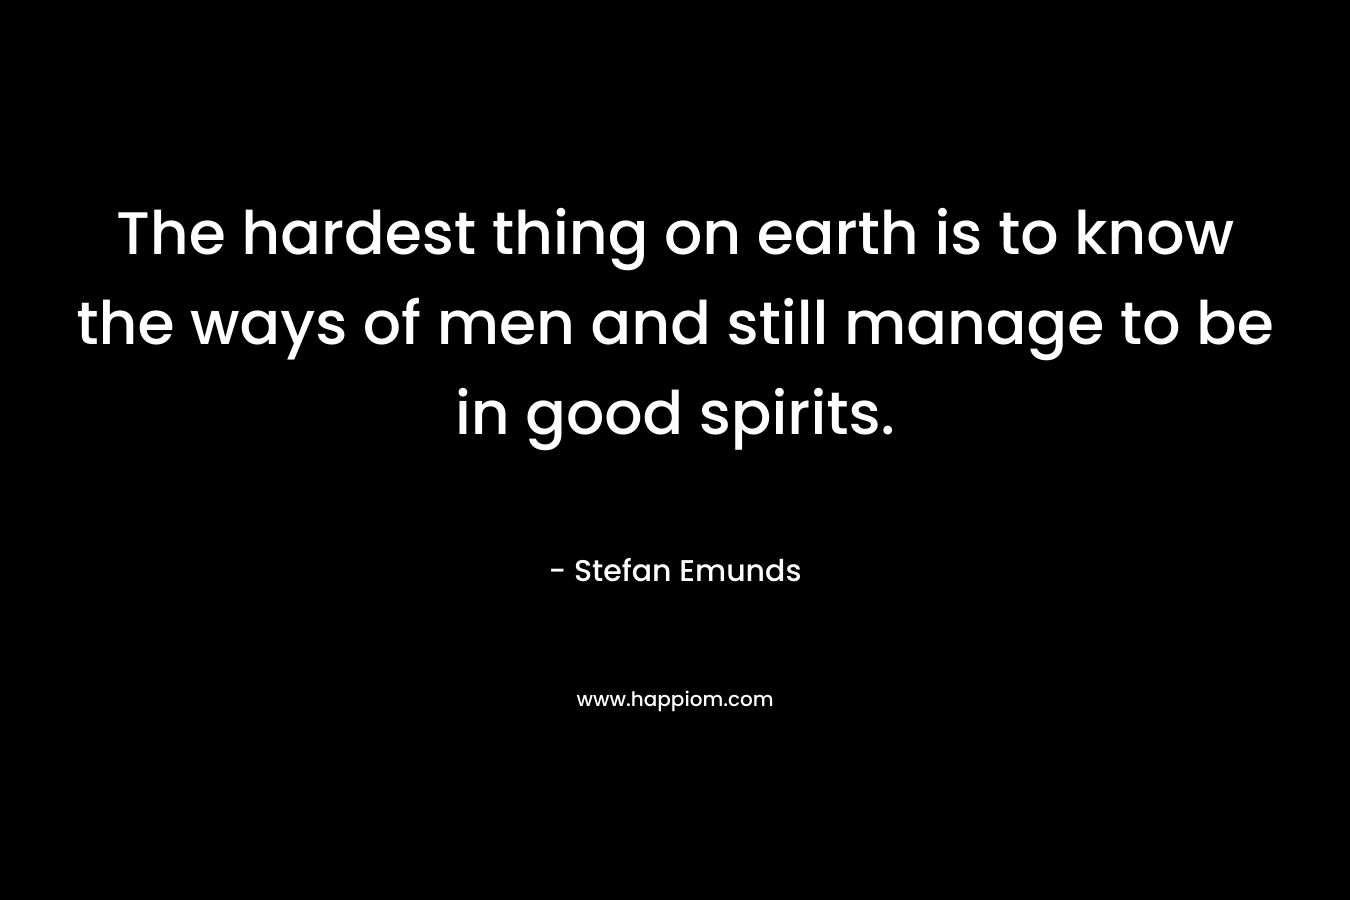 The hardest thing on earth is to know the ways of men and still manage to be in good spirits. – Stefan Emunds